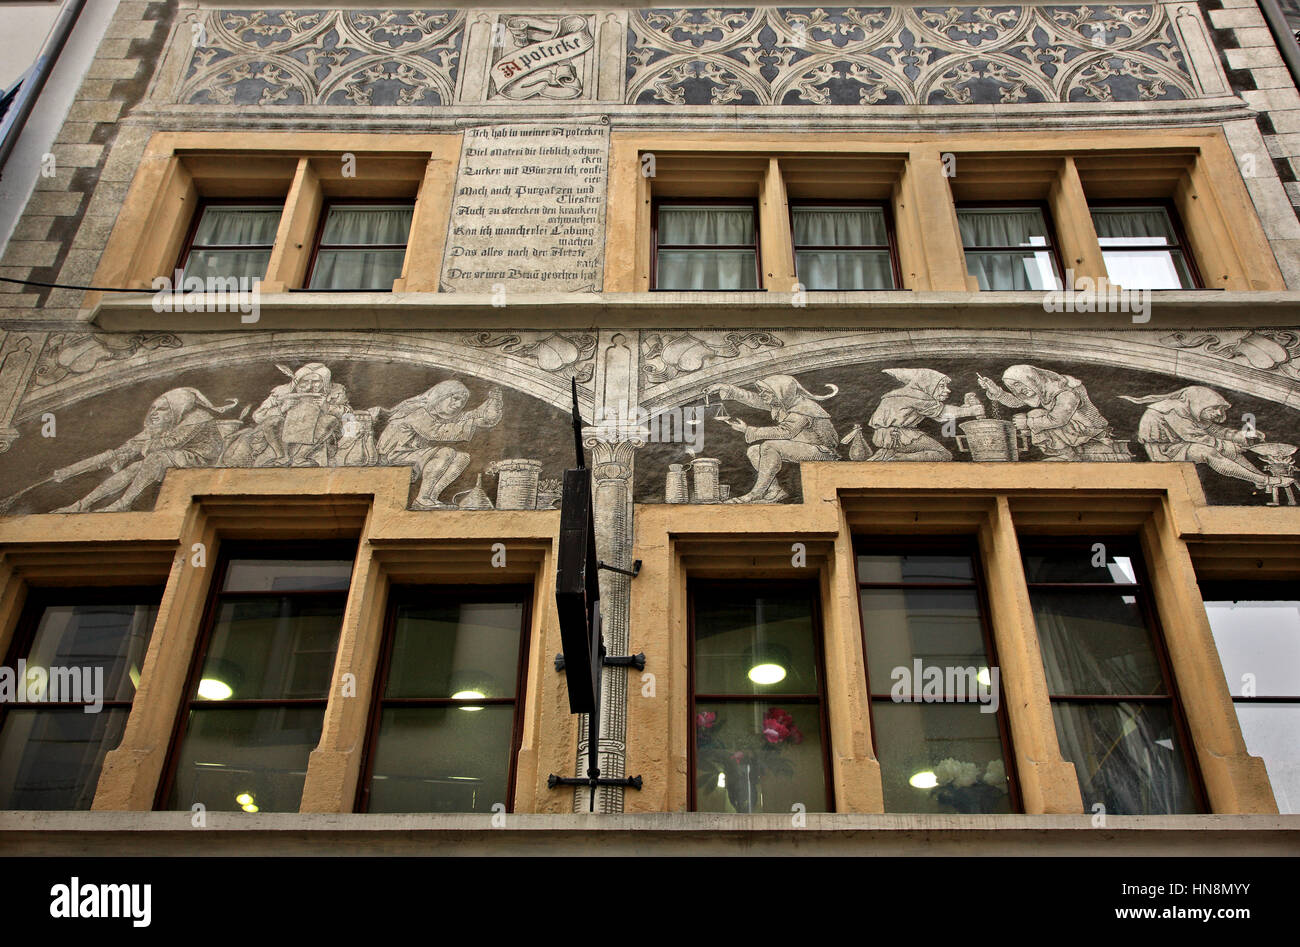 Facade of building decorated with the sgraffito technique, in the old town (Altstadt) of Lucerne, Switzerland. Stock Photo